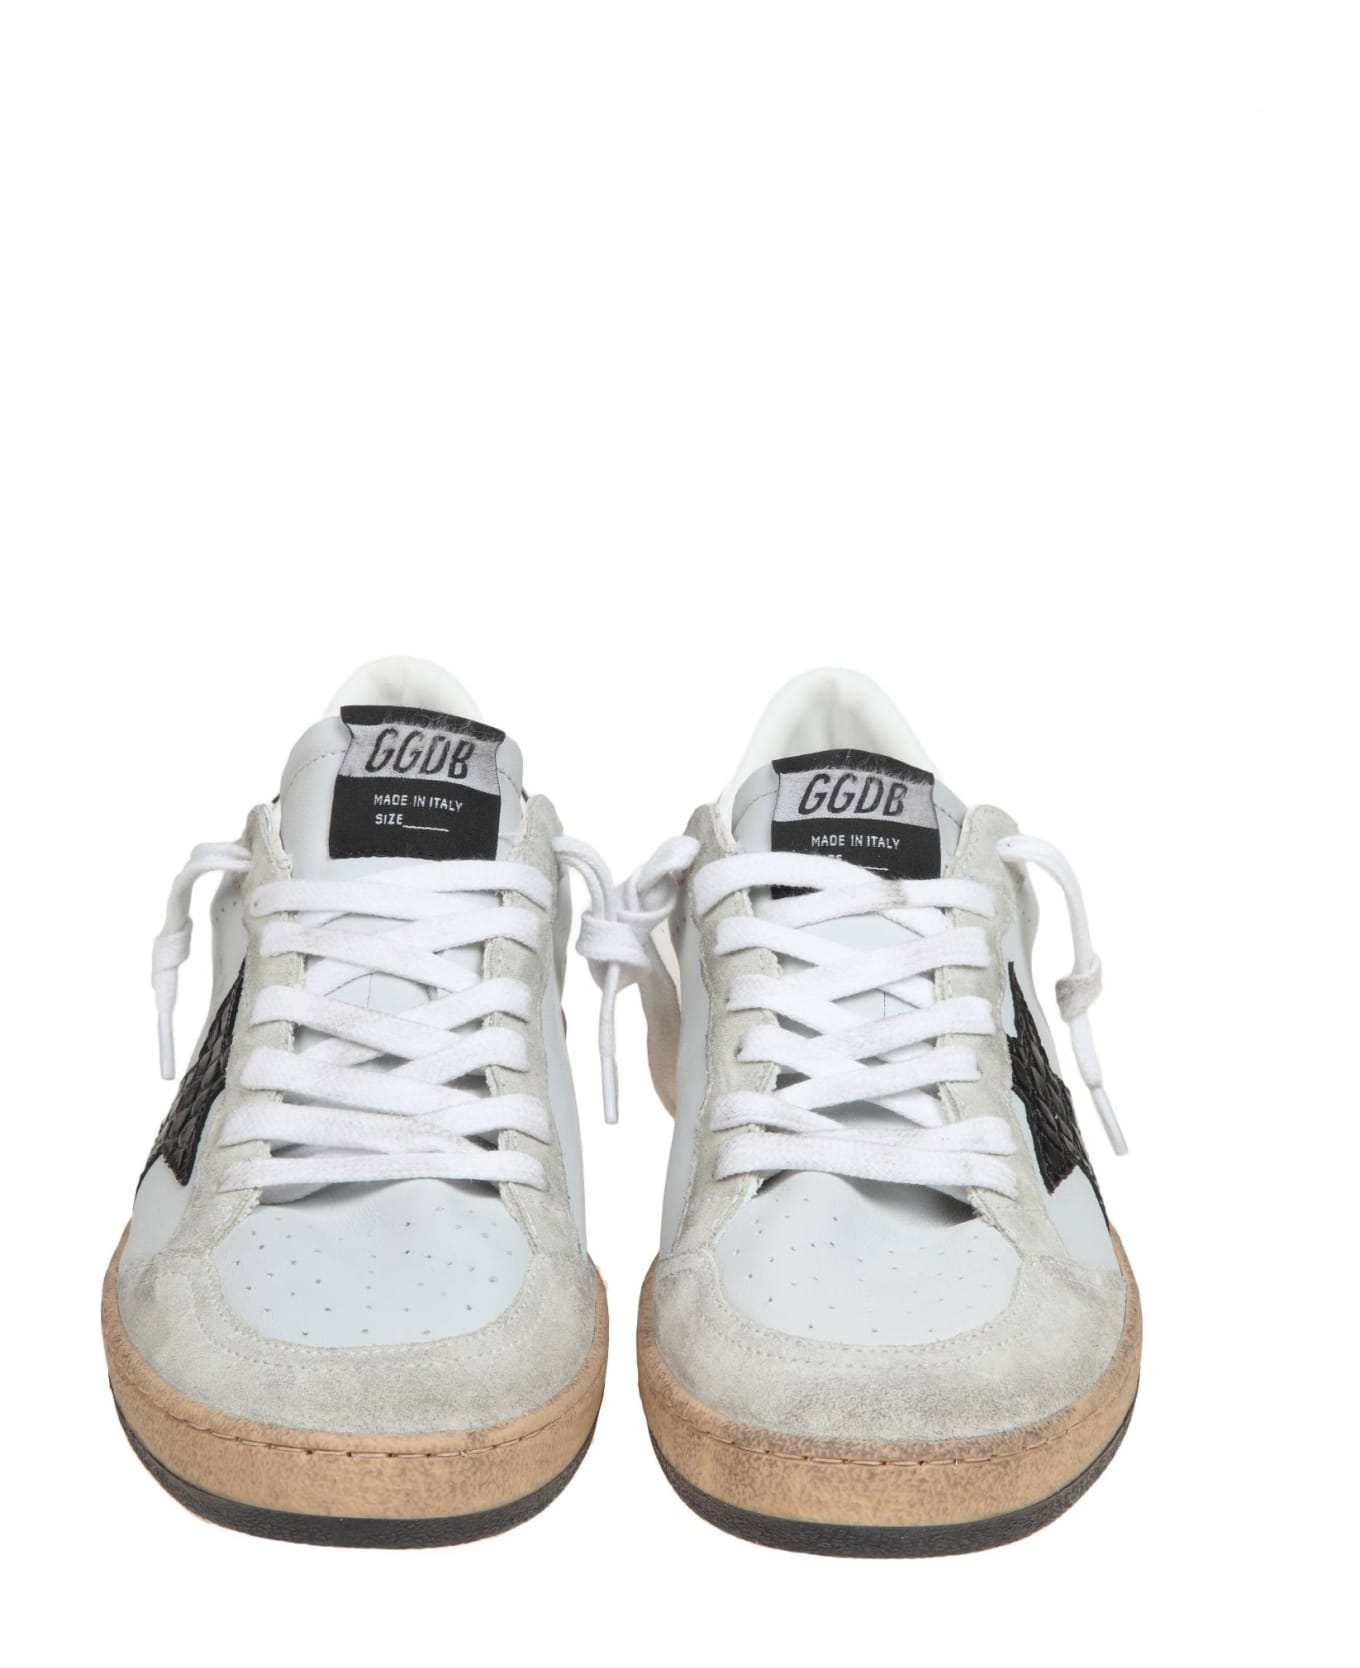 Golden Goose Ballstar In Ice Color Leather And Suede - GRAY/ICE/BLK